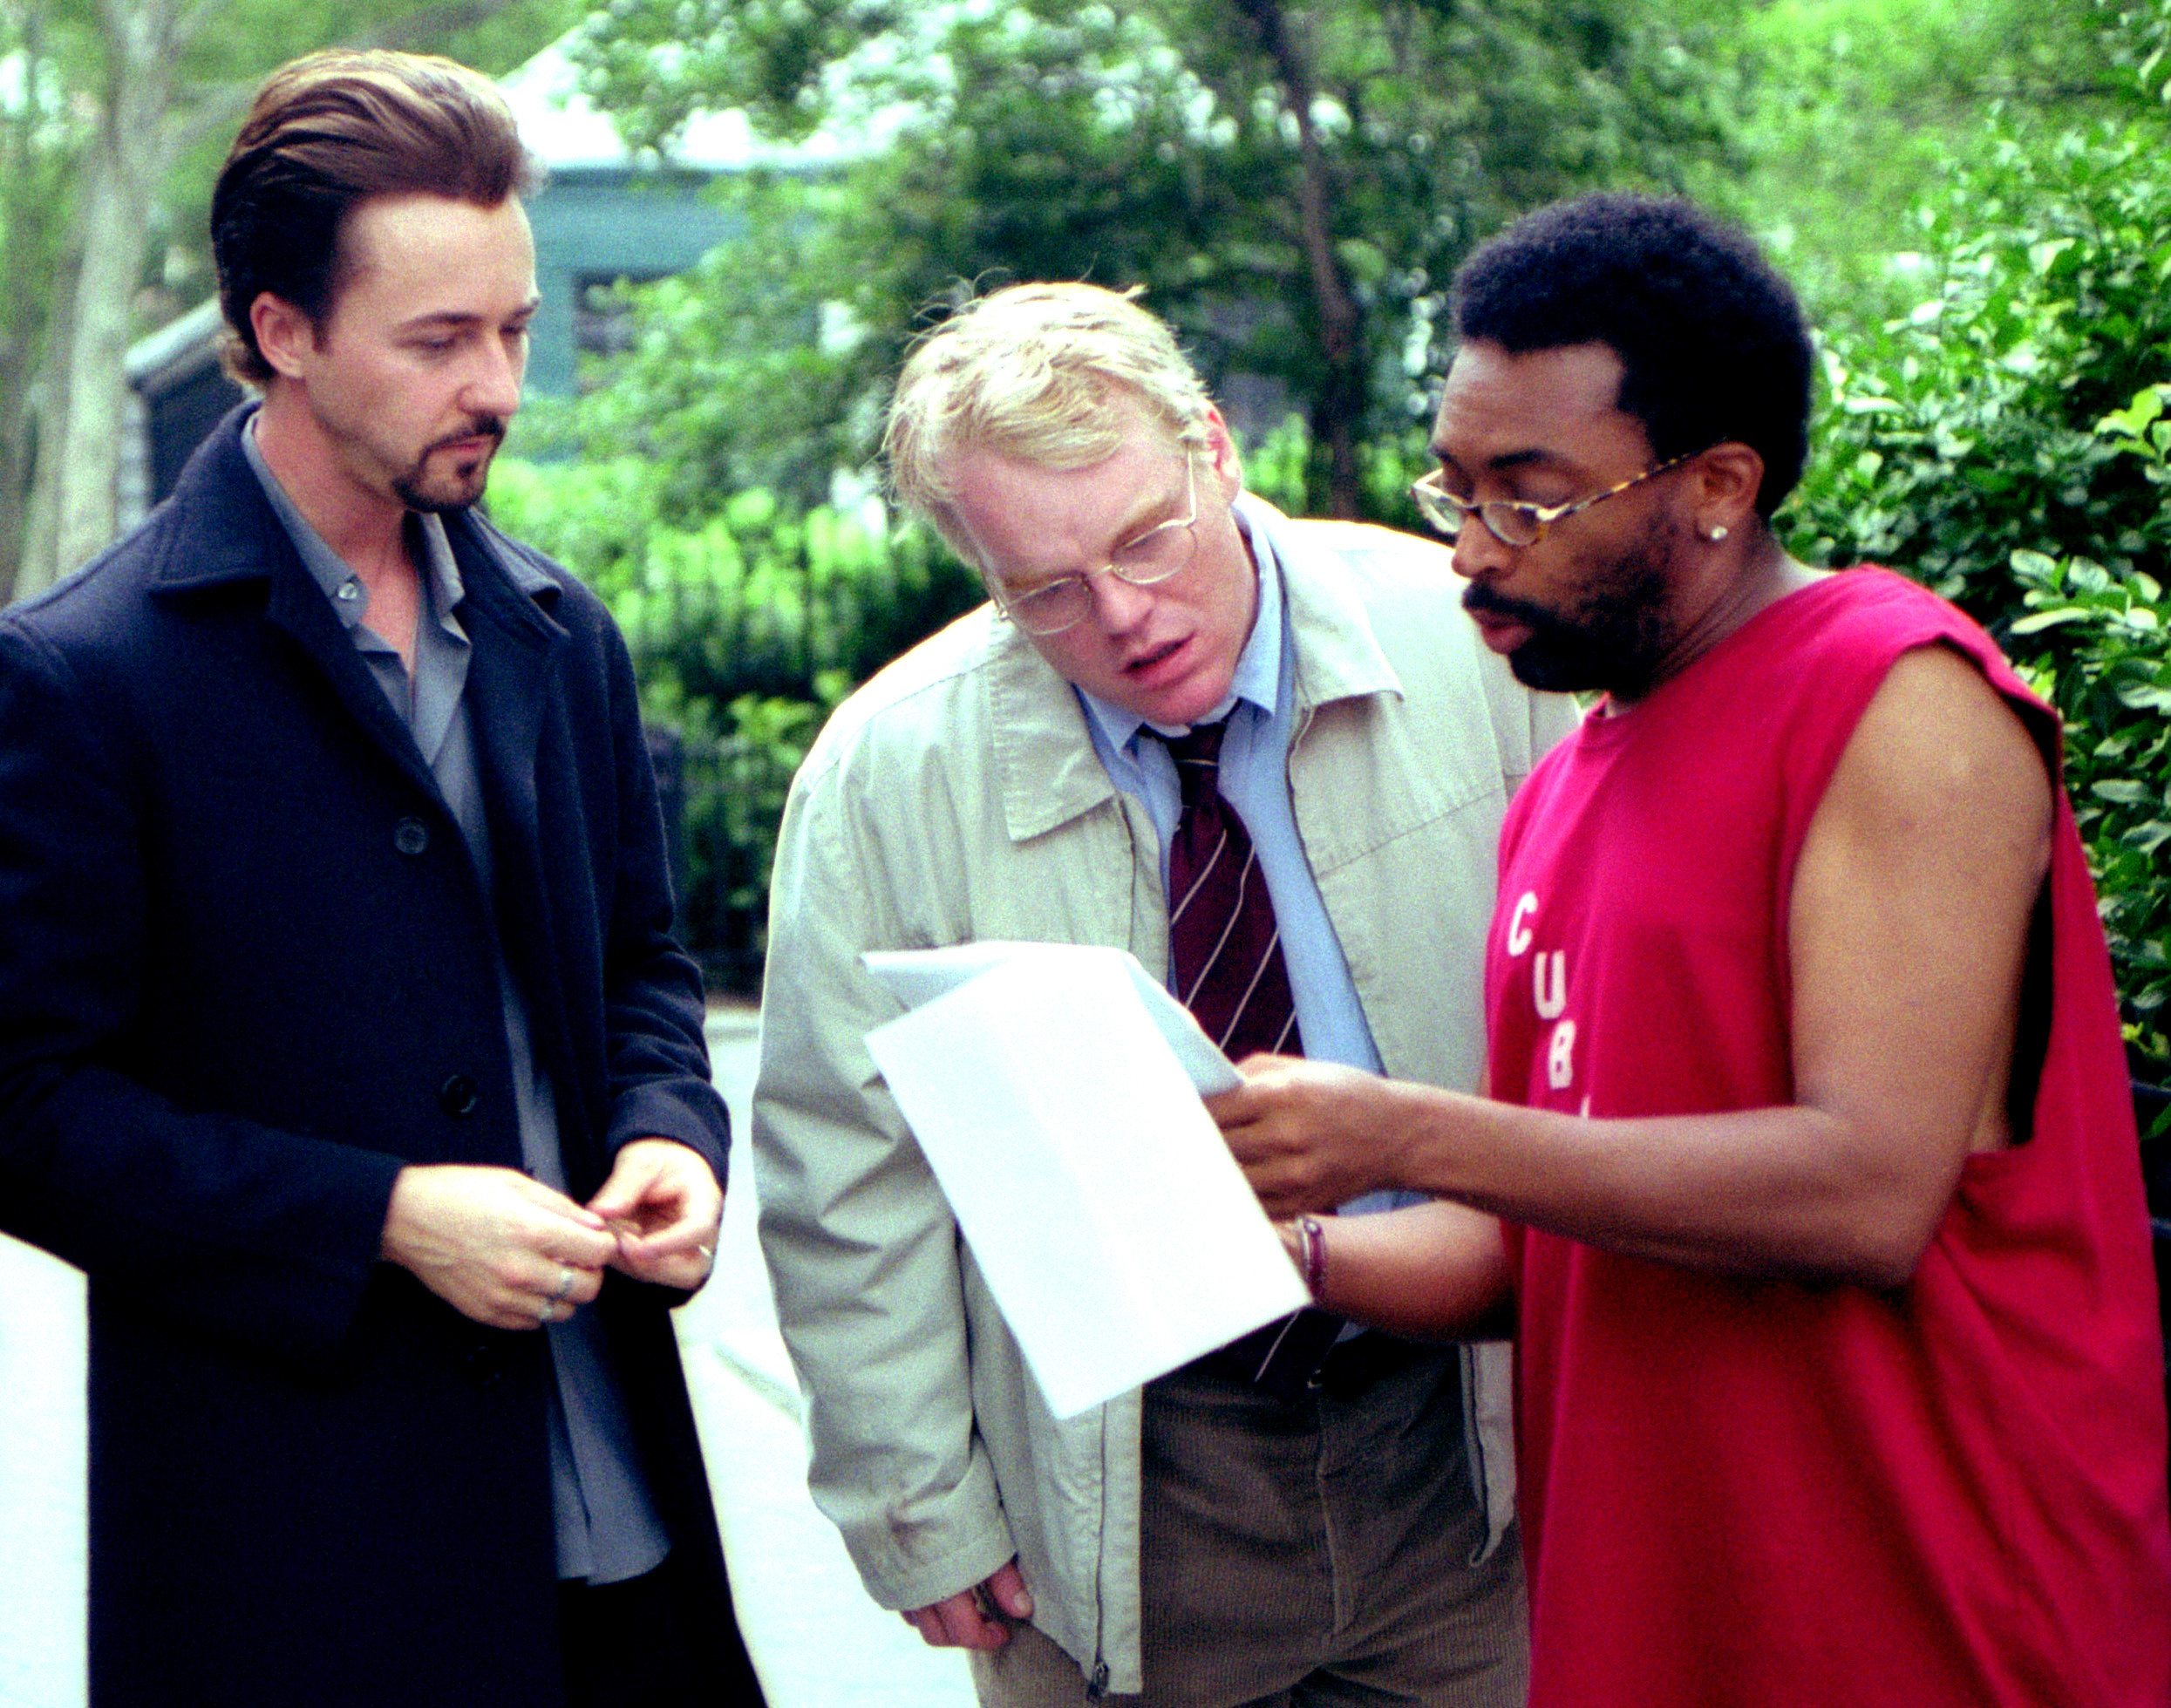 Spike Lee going over the script with Edward Norton and Phillip Seymour Hoffman